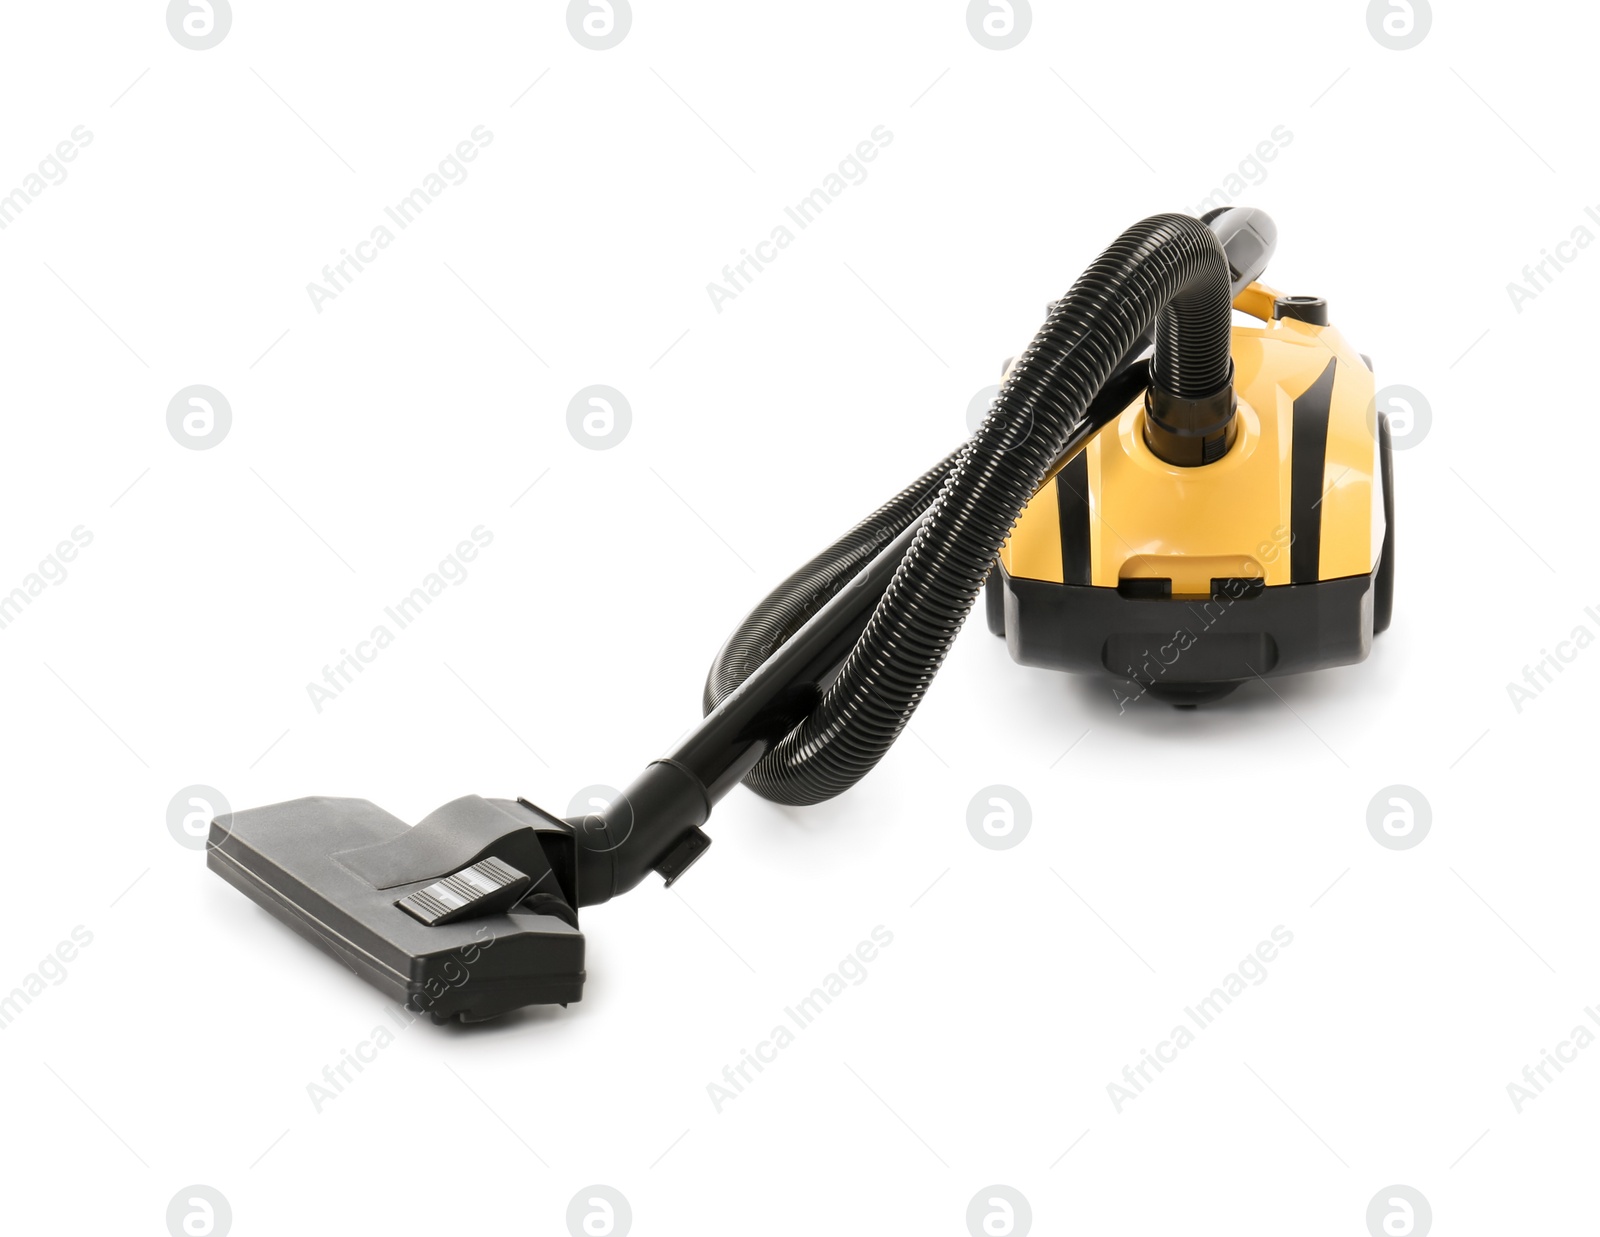 Photo of Modern yellow vacuum cleaner isolated on white